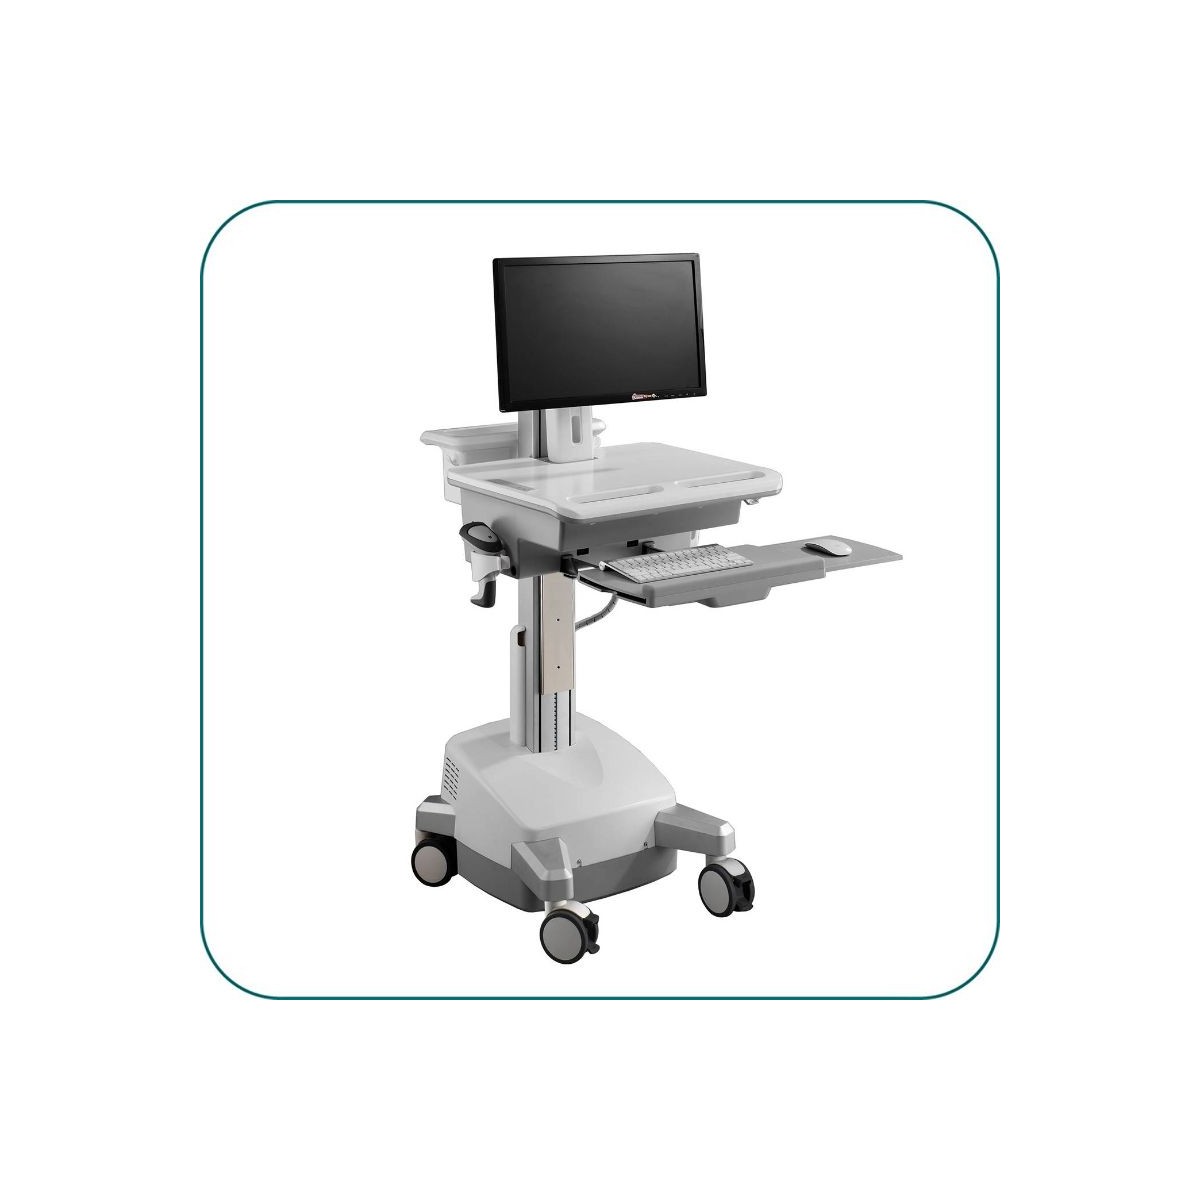 Aavara CMH01 Powered Mobile Medical Cart with Manual LIFT - Single Monitor with height adjustment Type